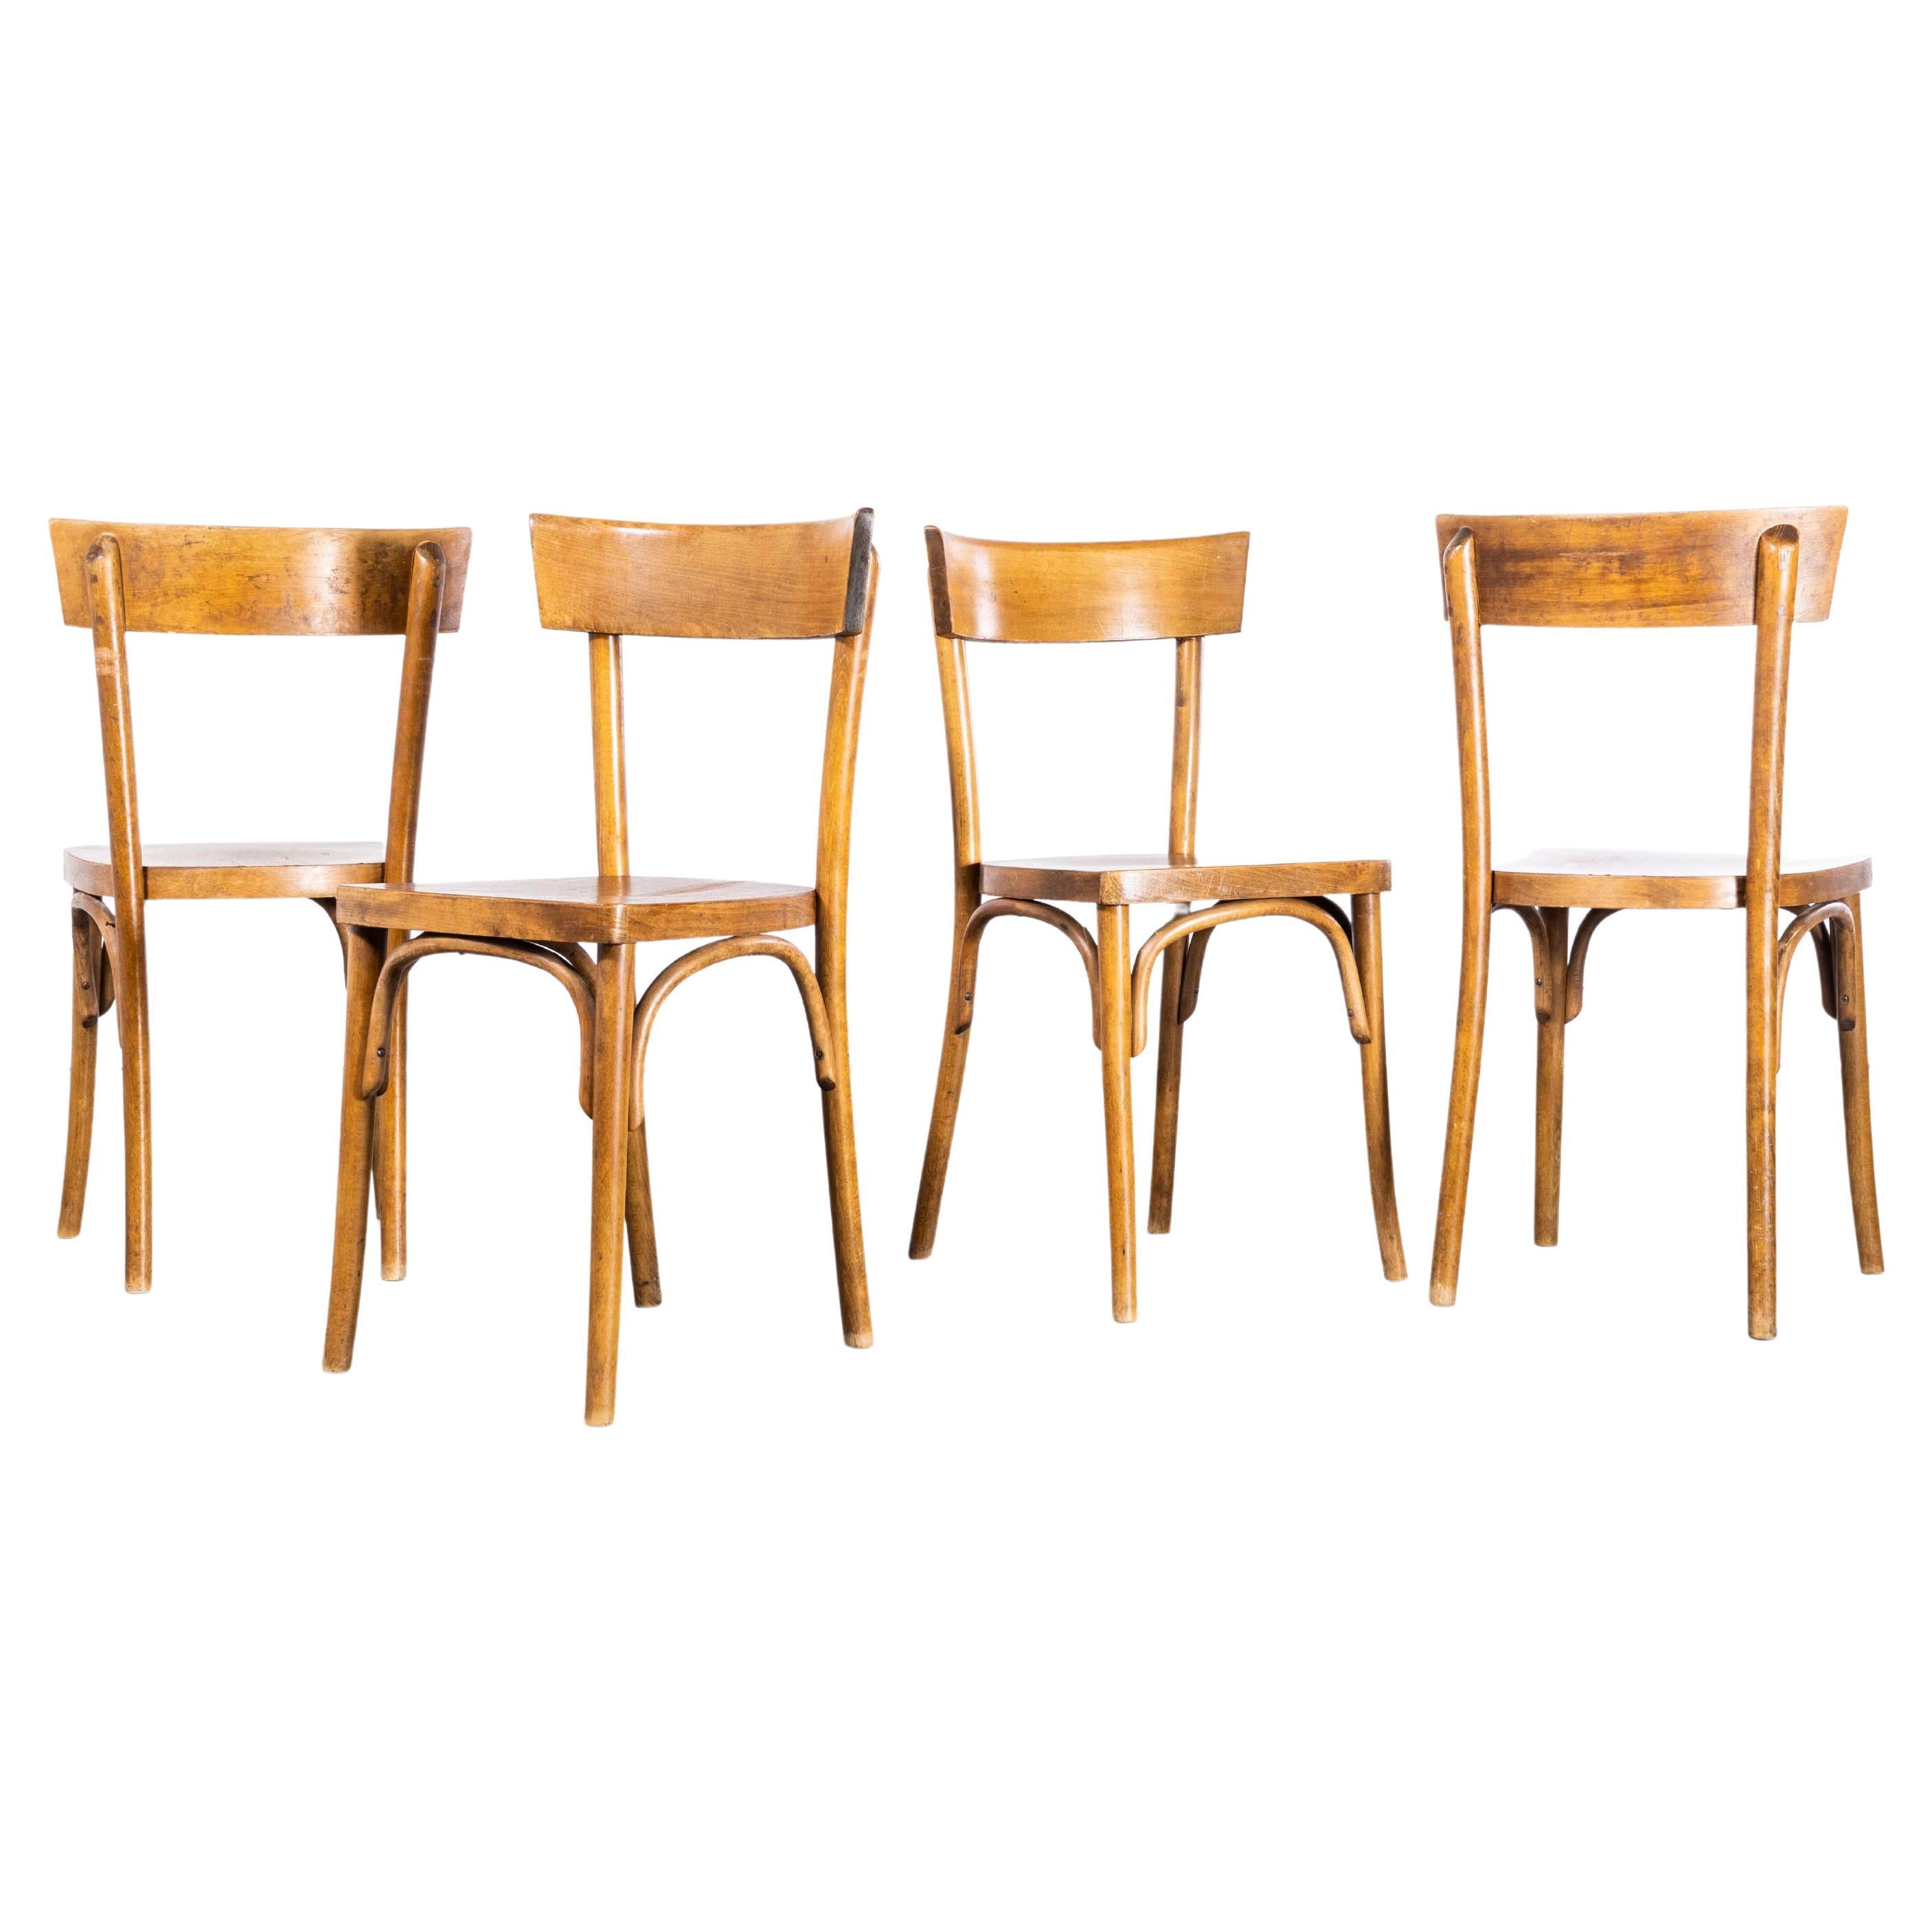 1950s Bentwood Mid Tan Single Bar Back Dining Chairs – Set of Four '2582'